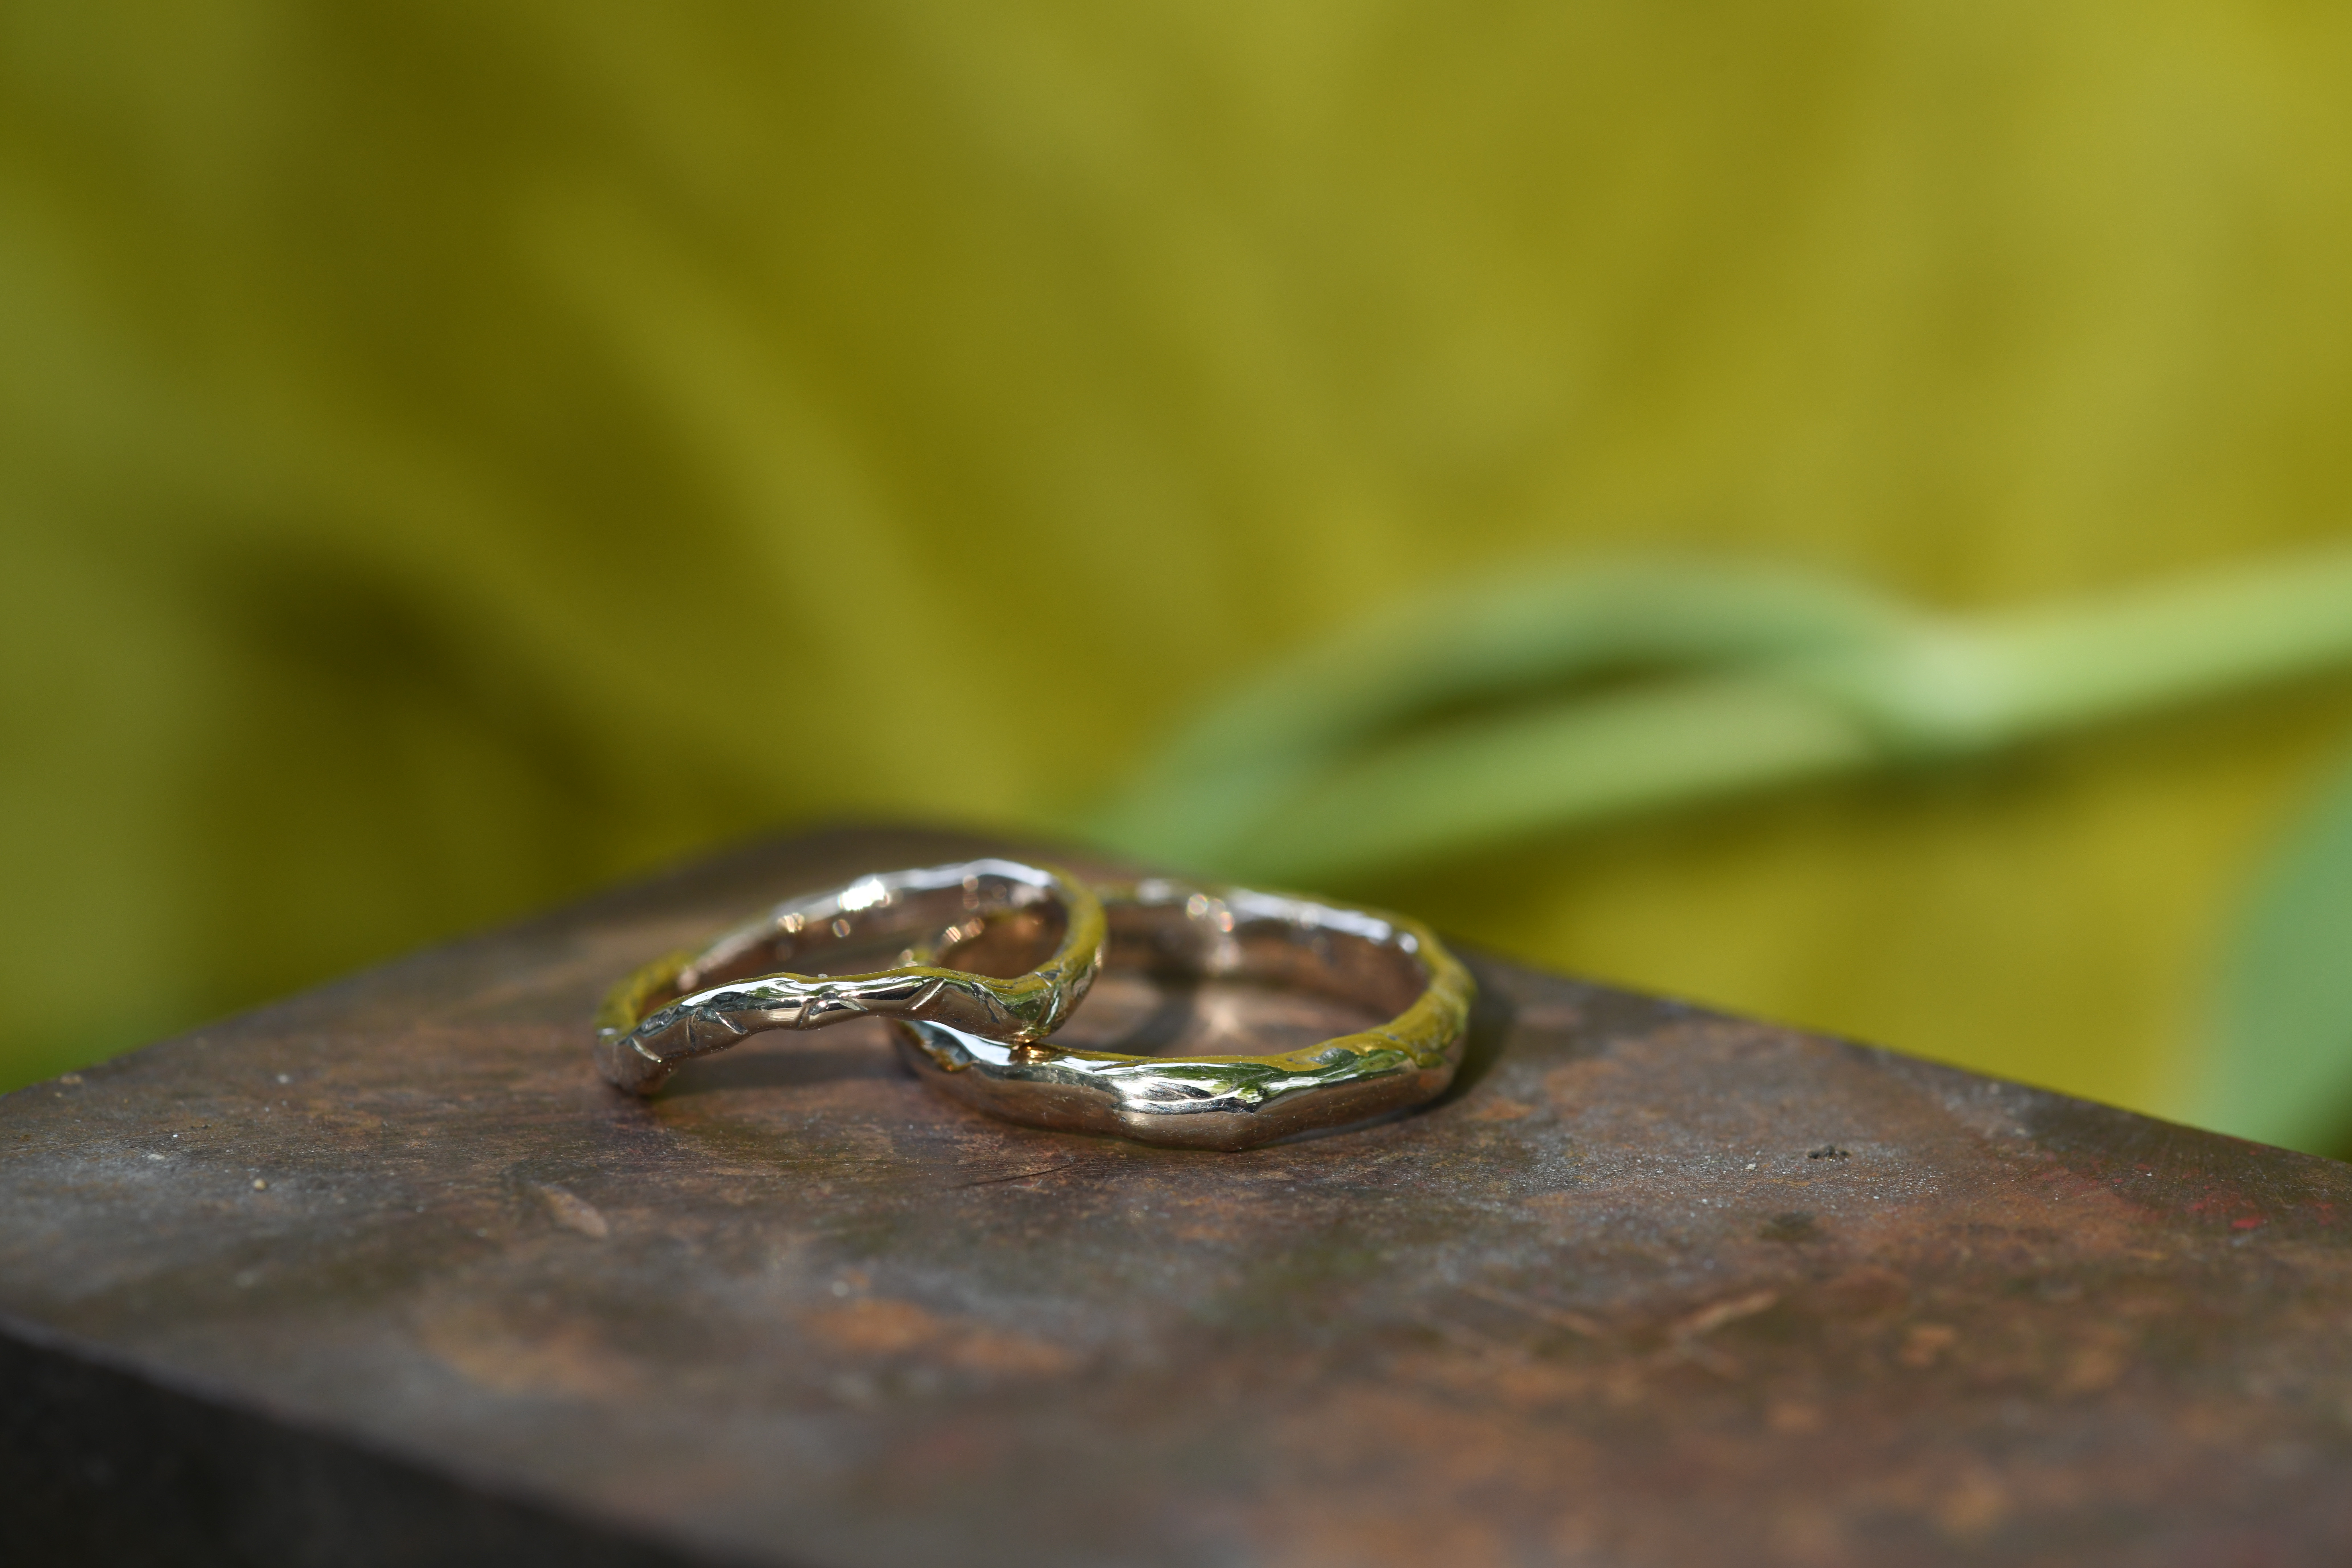 wedding bands cast in 14k gold, one with a slight curve as an engagement band, the texture mimicking the heirloom chain used to make the ring